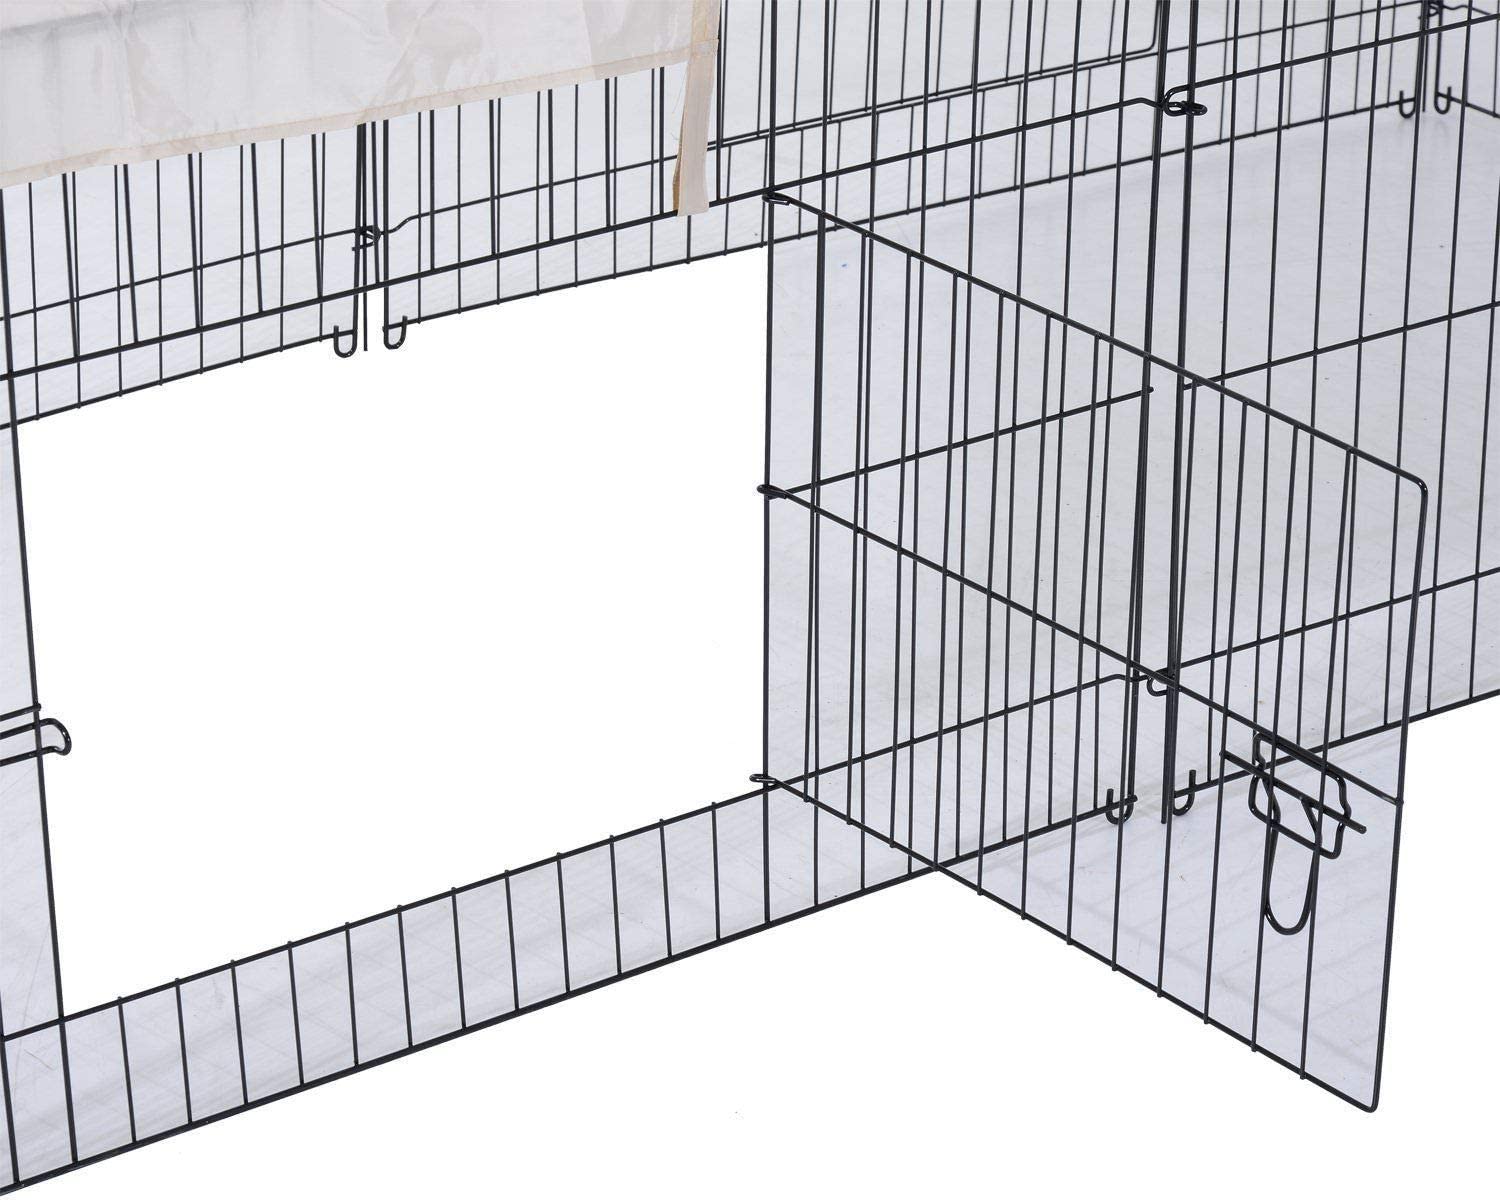 HYGRAD BUILT TO SURVIVE Rabbit Run Playpen Rectangular with Pitched Roof 5 Ft 10 In Long x 2 Ft 5 In Wide with Protective Cover Pet Animal Play Pen Guinea Pig Pen, Dog Puppy Cage Ferret Play Pen